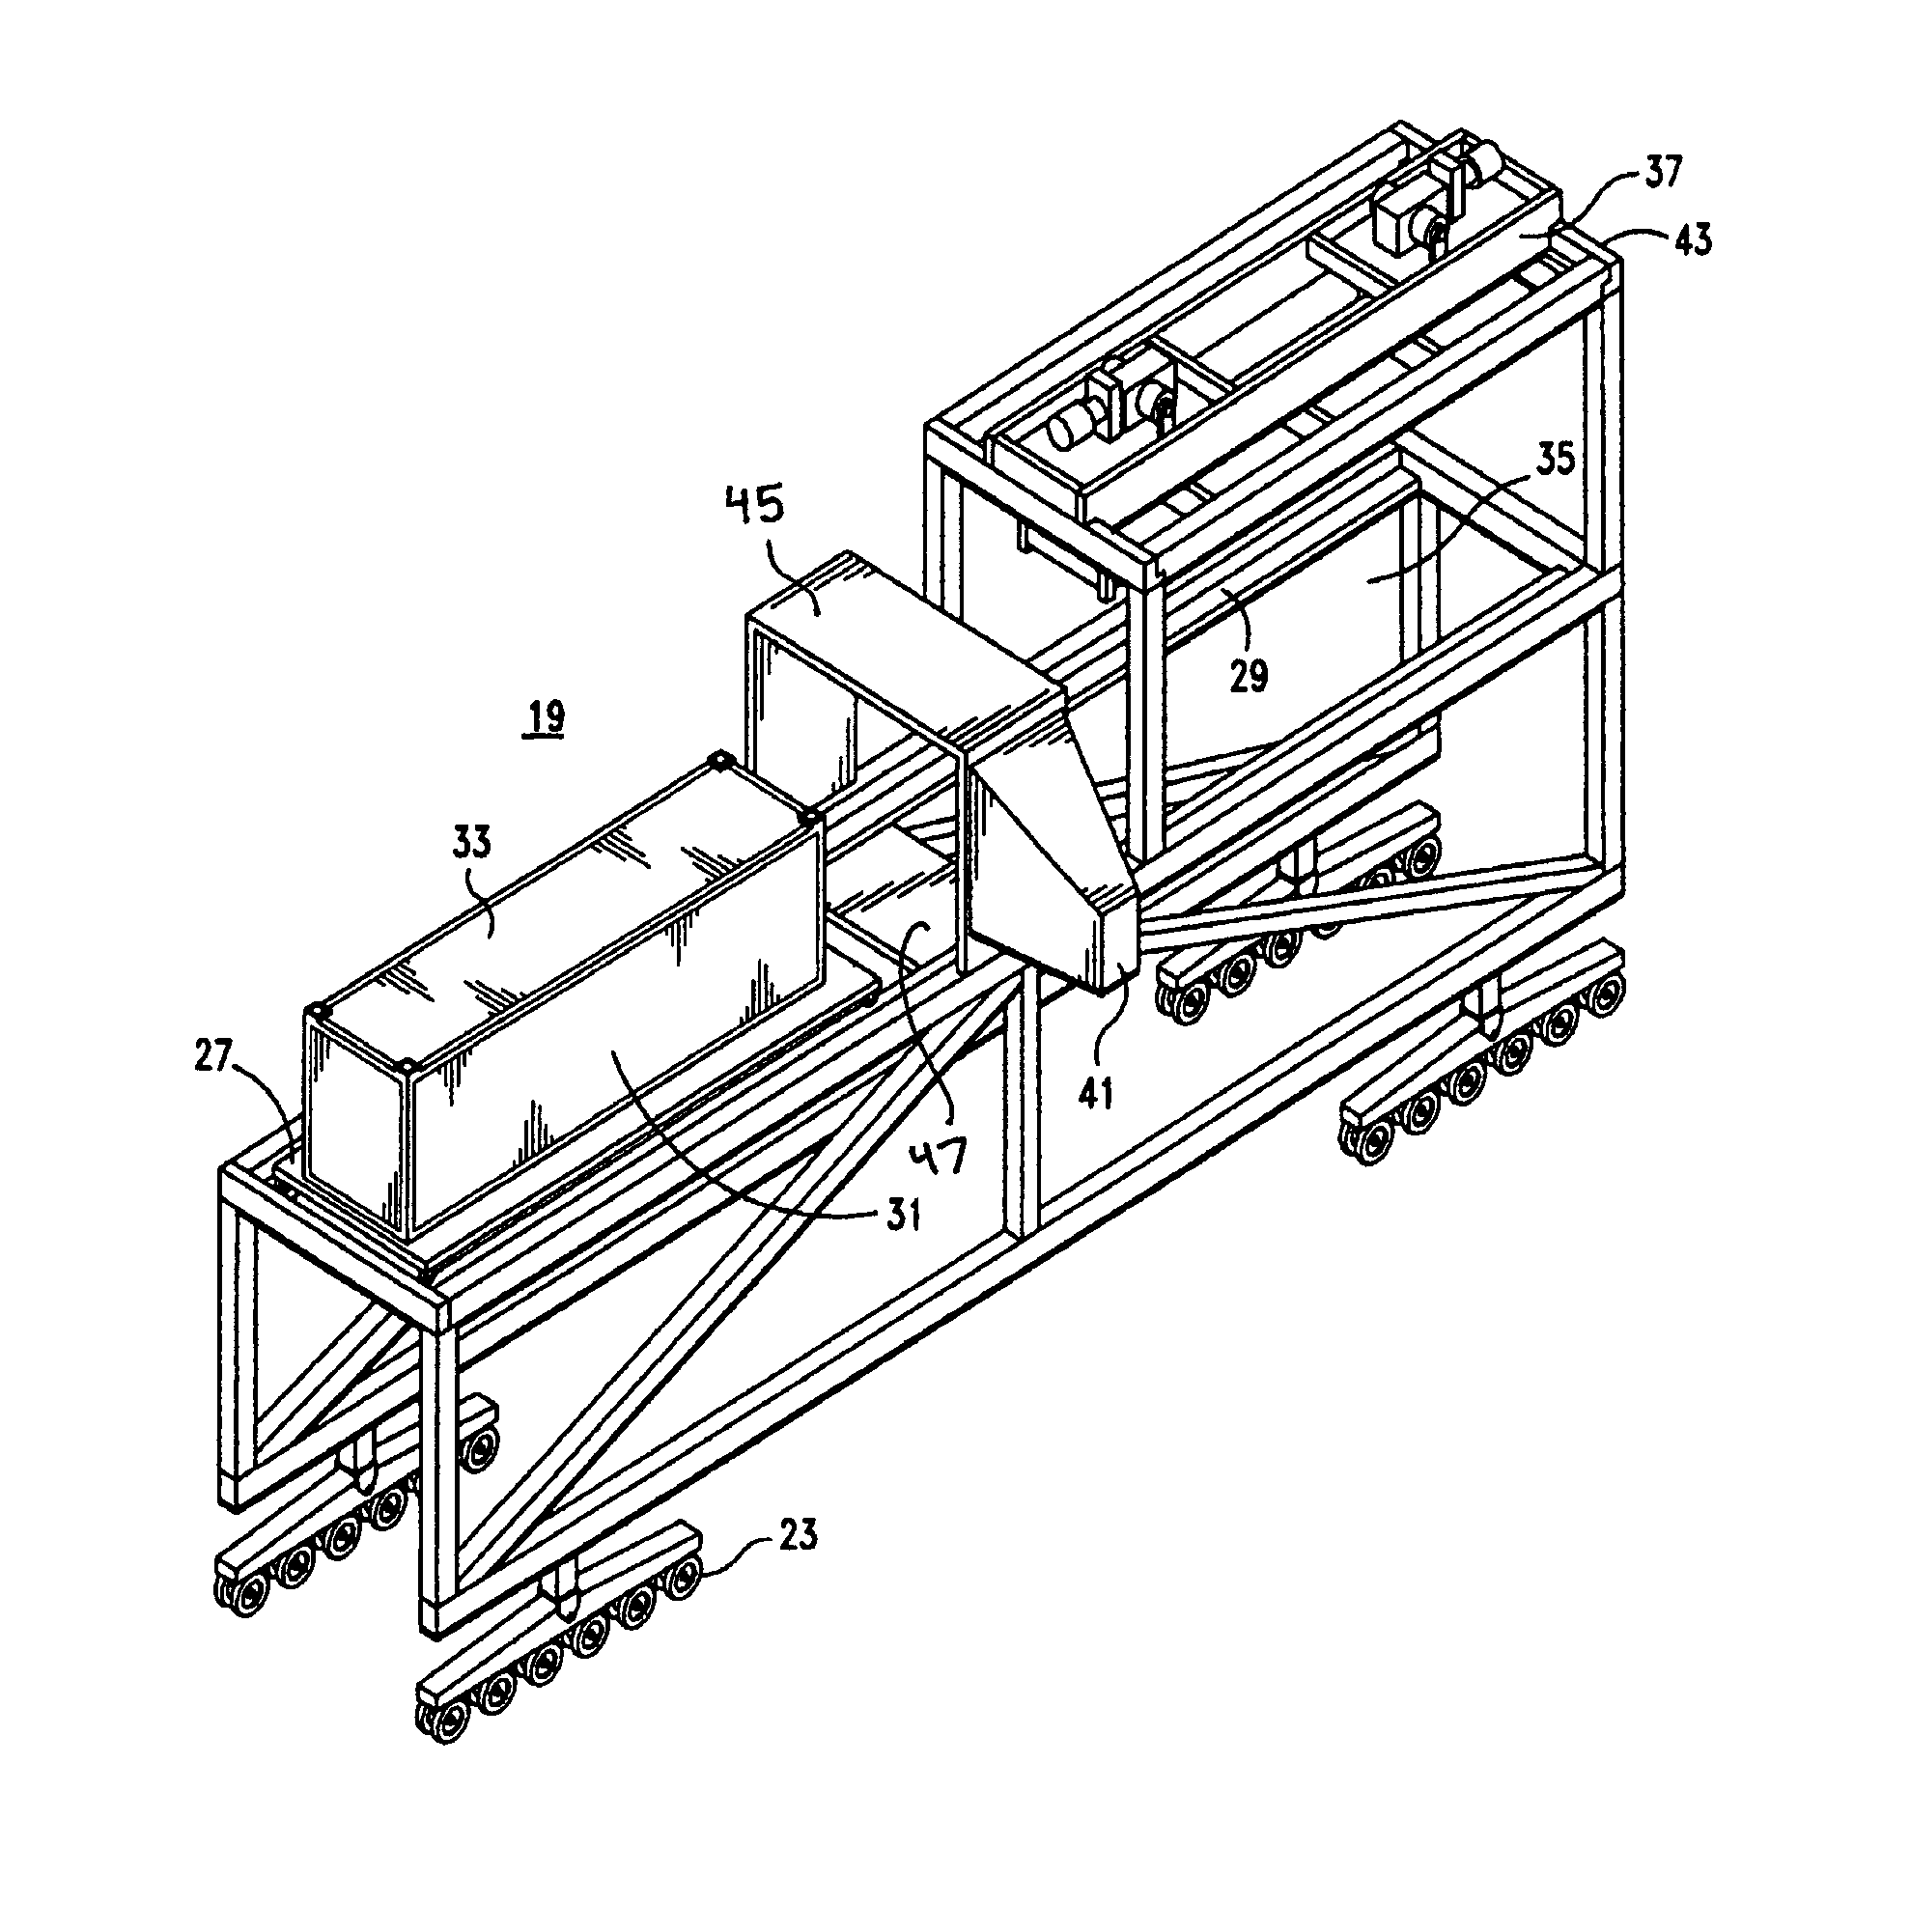 Method of operating a cargo container scanning crane